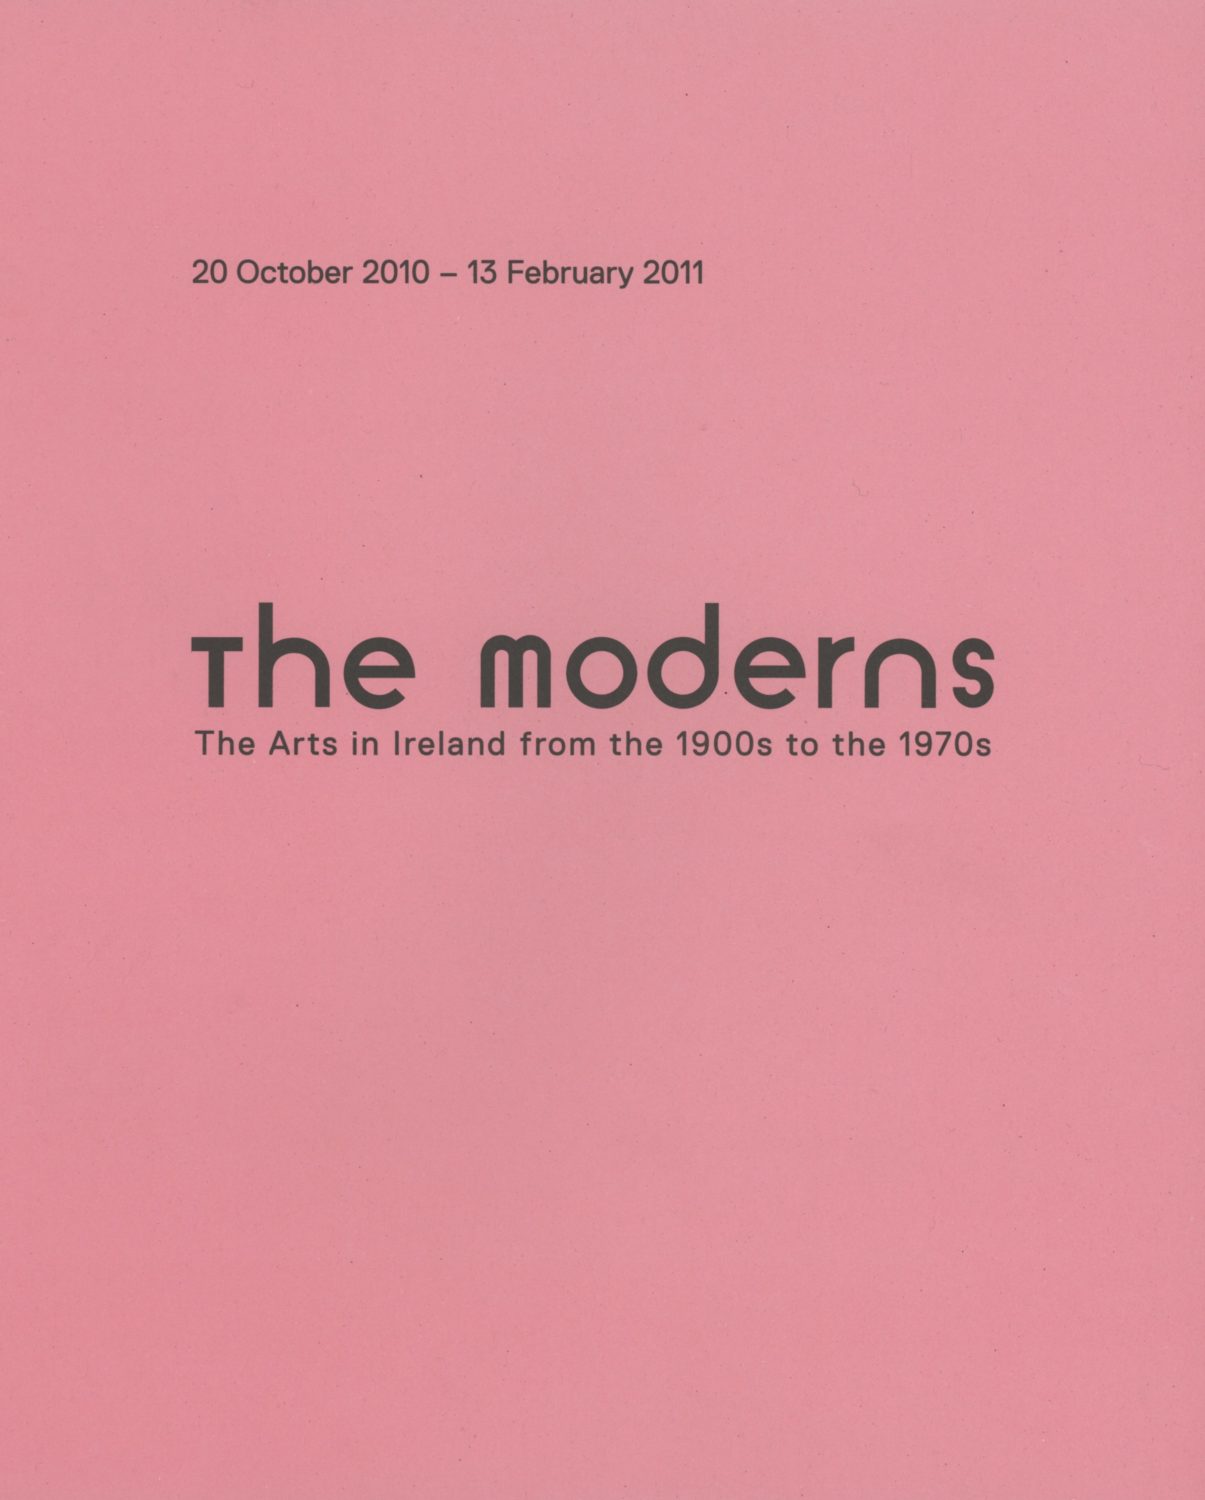 The Moderns. The Arts in Ireland from the 1900s to the 1970s